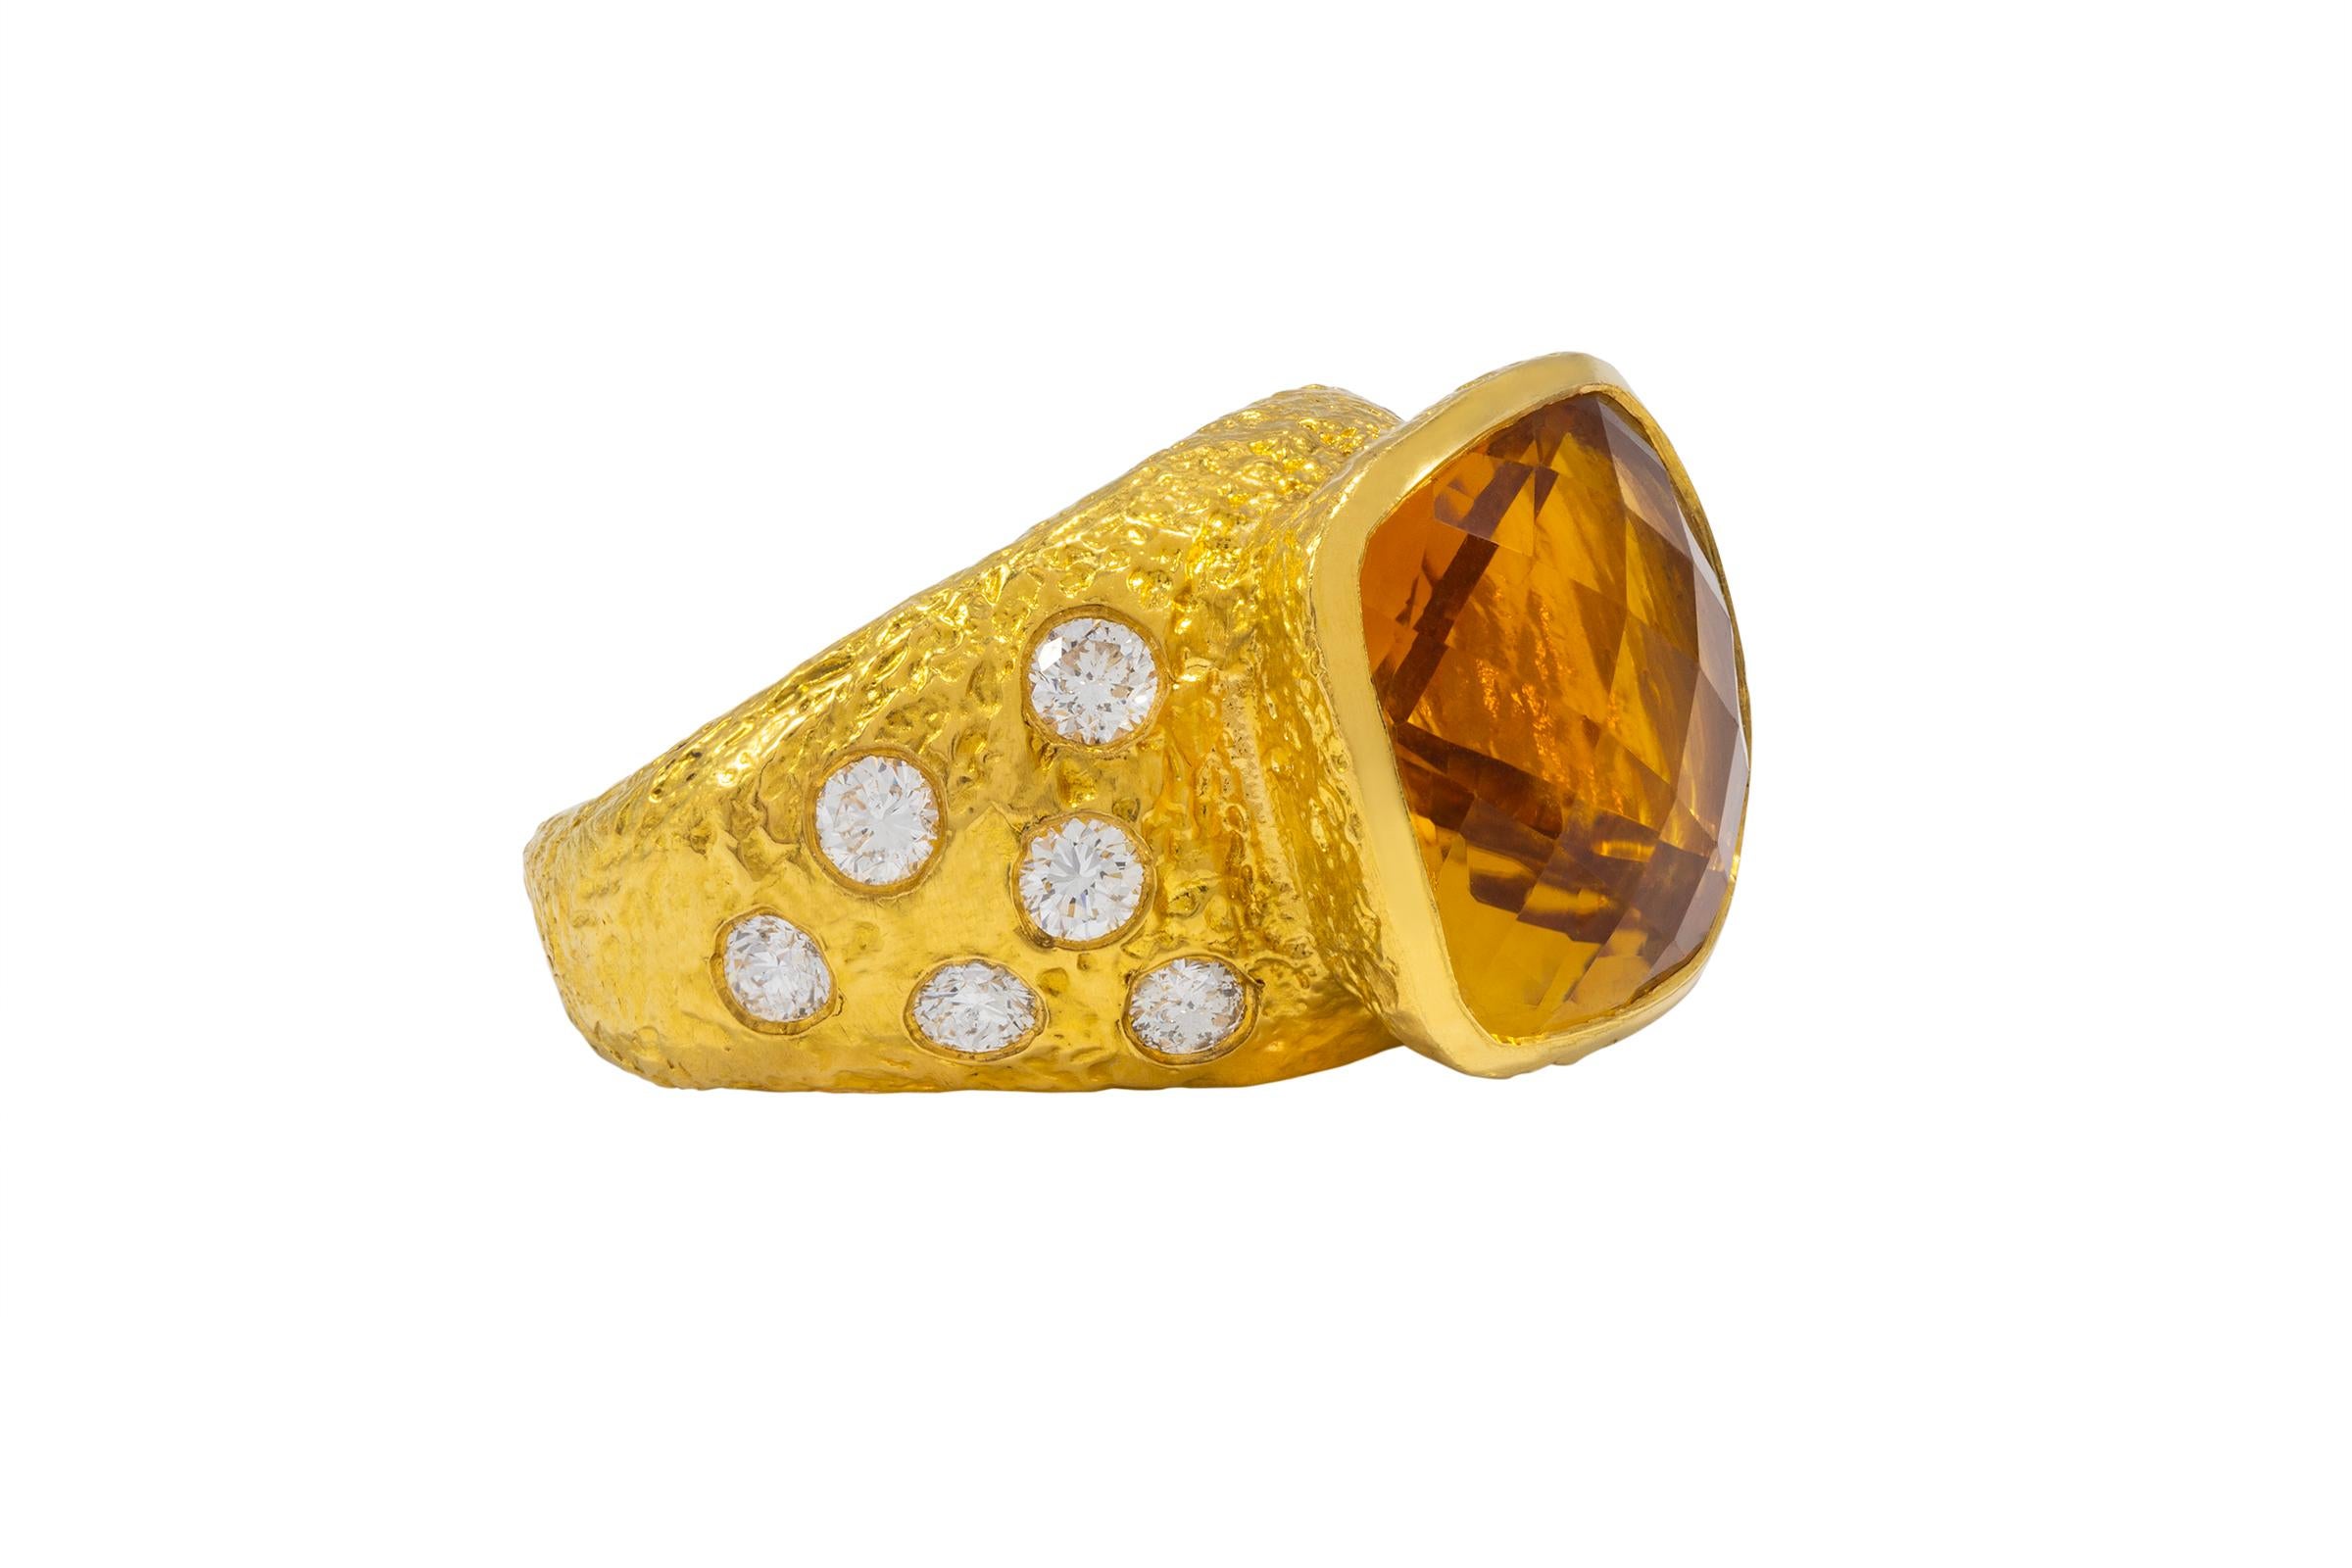 22k Gold Citrine Birthstone Cocktail Ring with Diamonds, by Tagili In New Condition For Sale In New York, NY